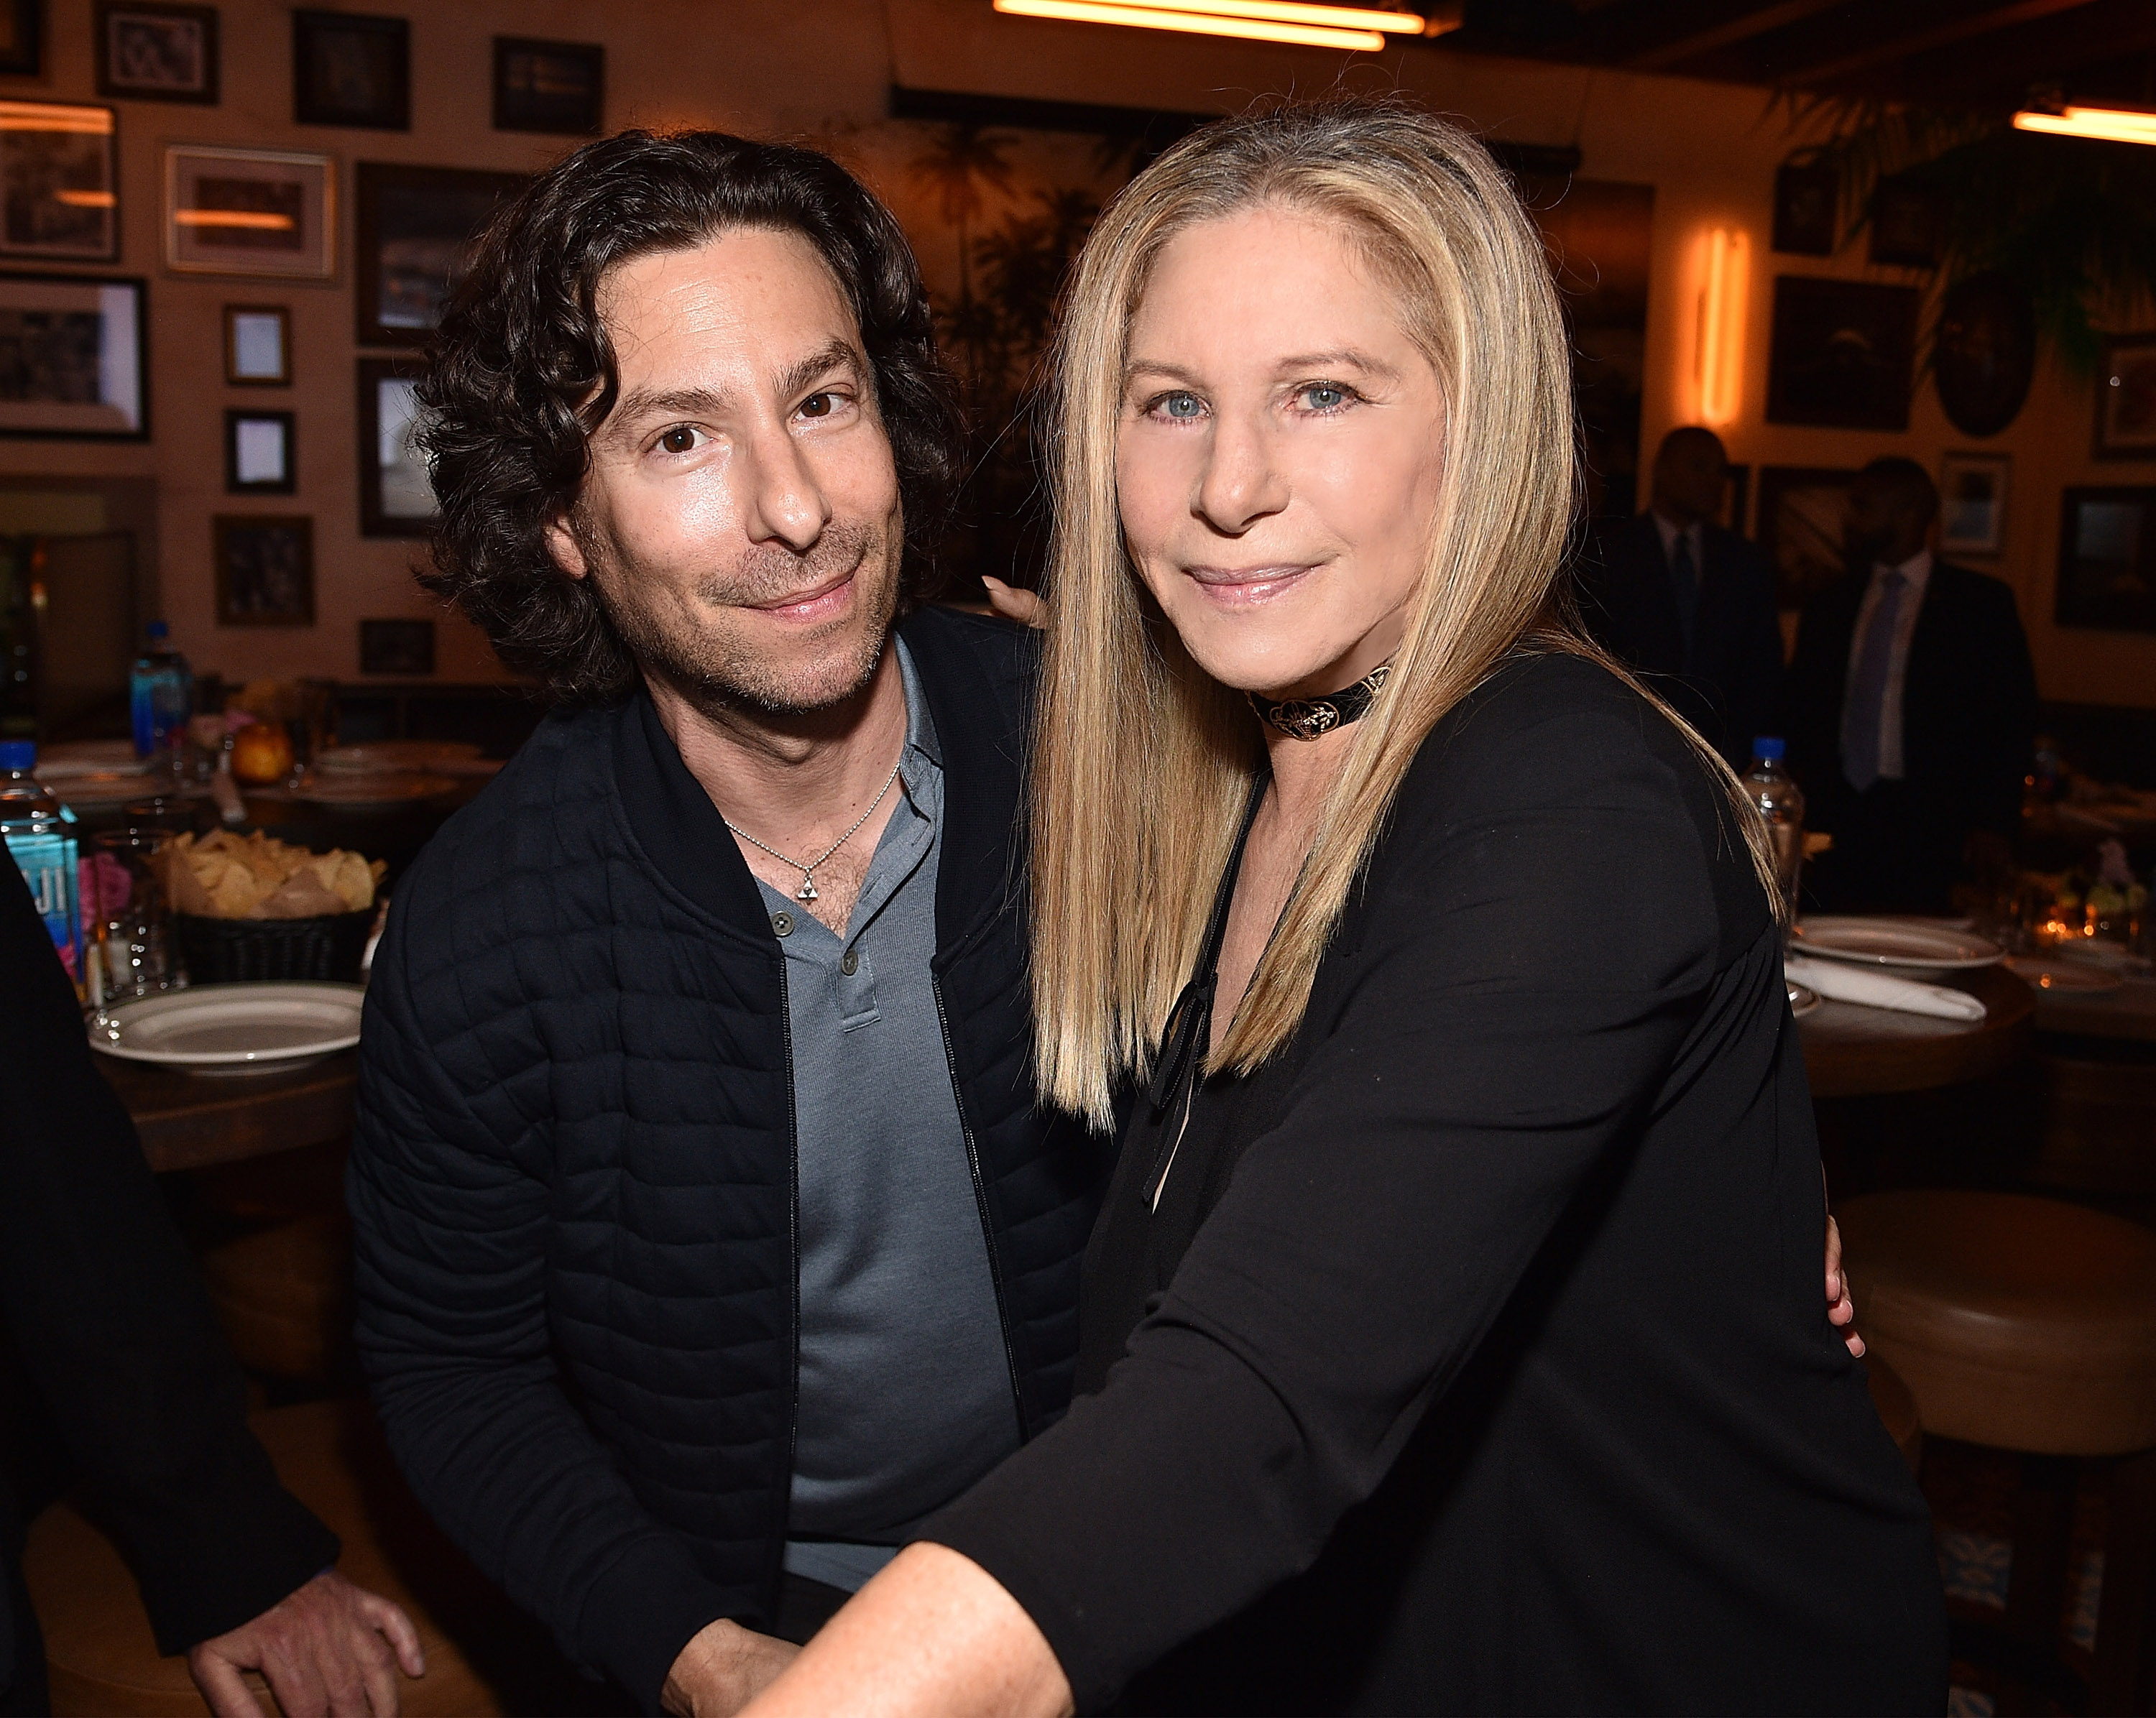 Jason Gould and Barbra Streisand attend Barbra Streisand's 75th birthday at Cafe Habana on April 24, 2017 in Malibu, California. | Source: Getty Images